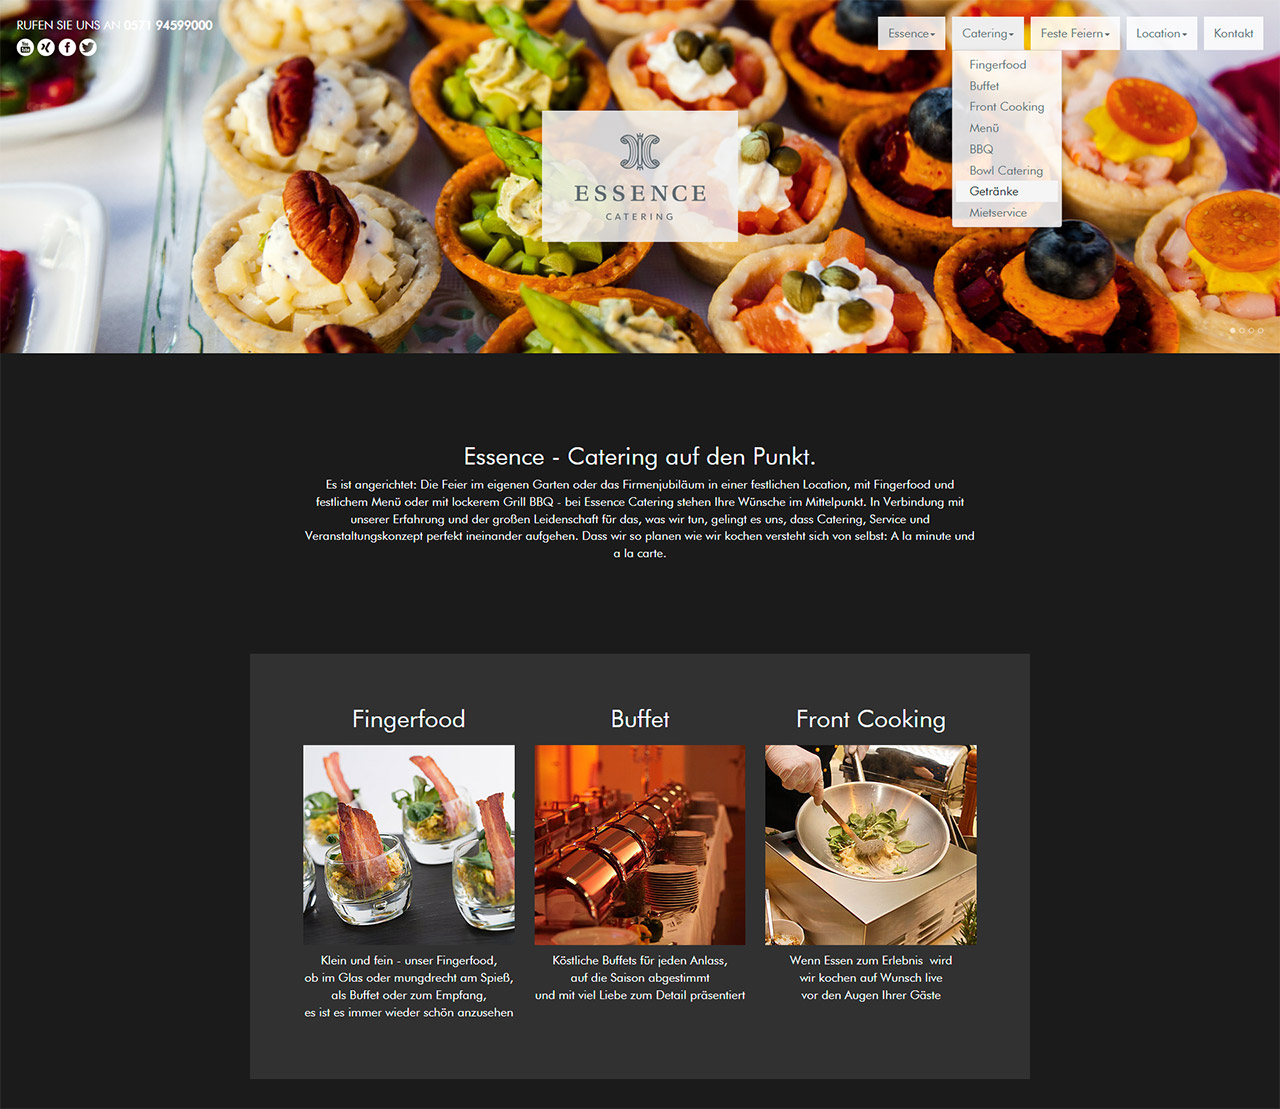 ESSENCE CATERING - Catering und Partyservice in Minden, Philipp Pudenz